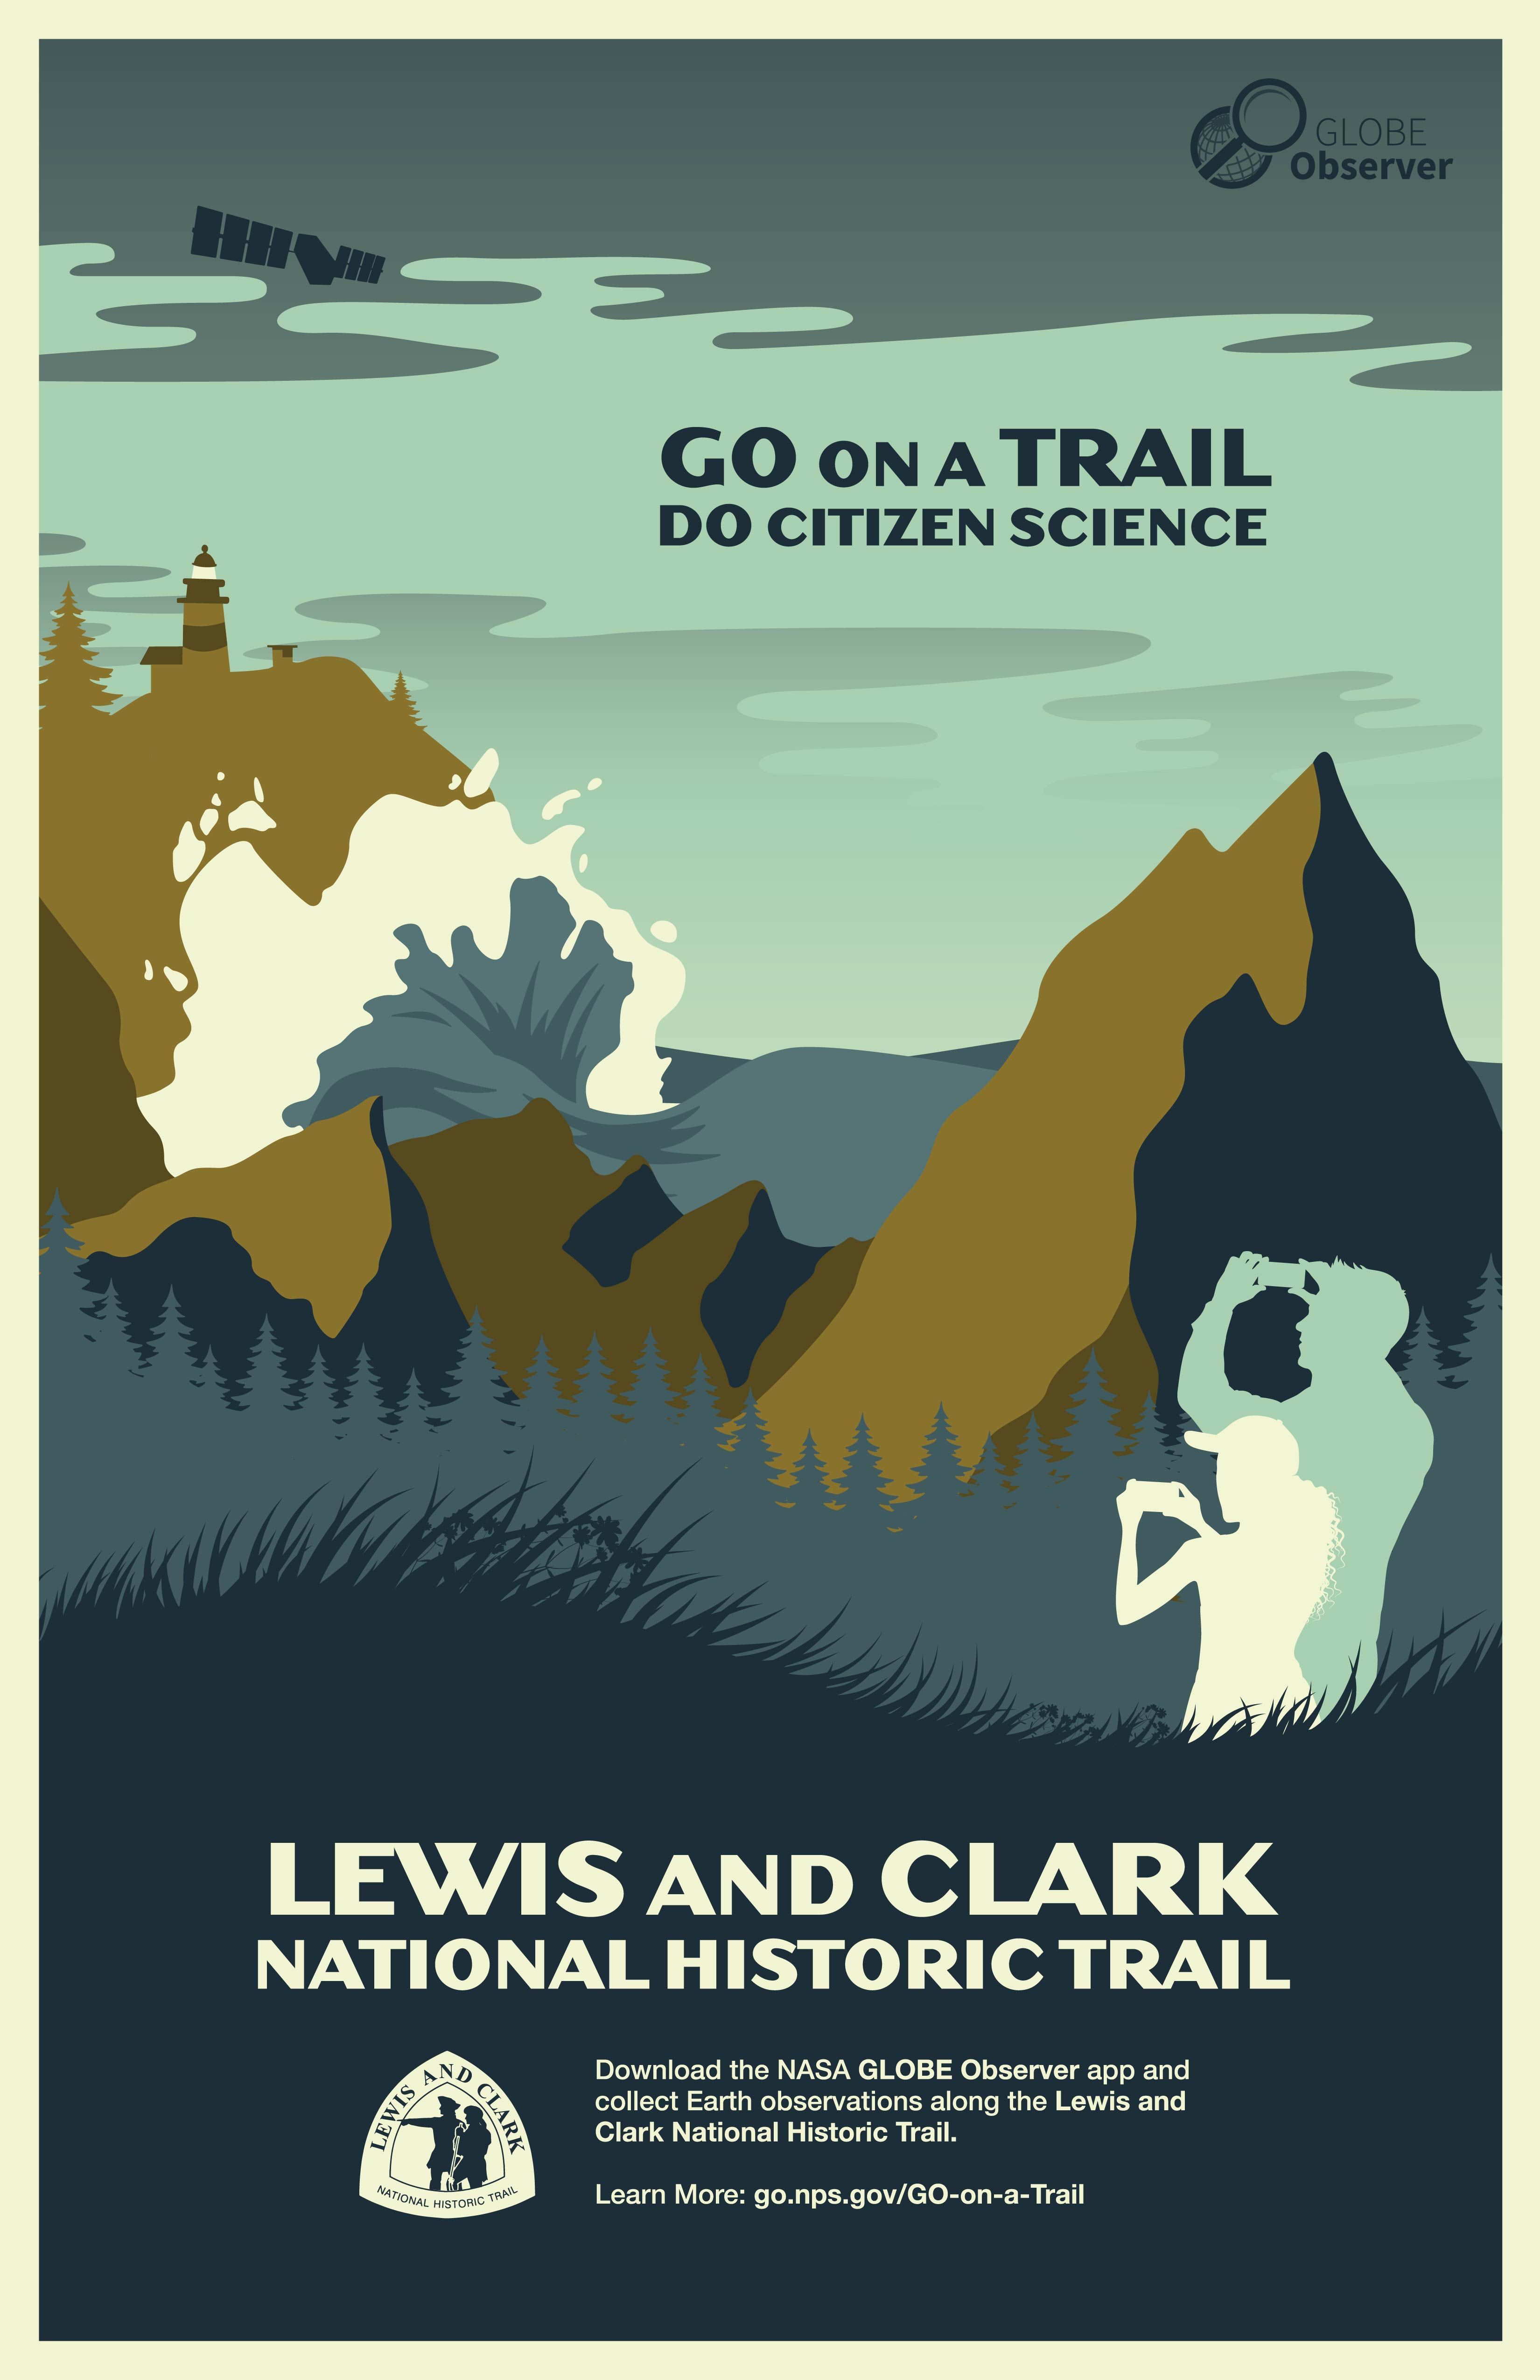 GO on a Trail - Do Citizen Science along the Lewis and Clark National Historic Trail